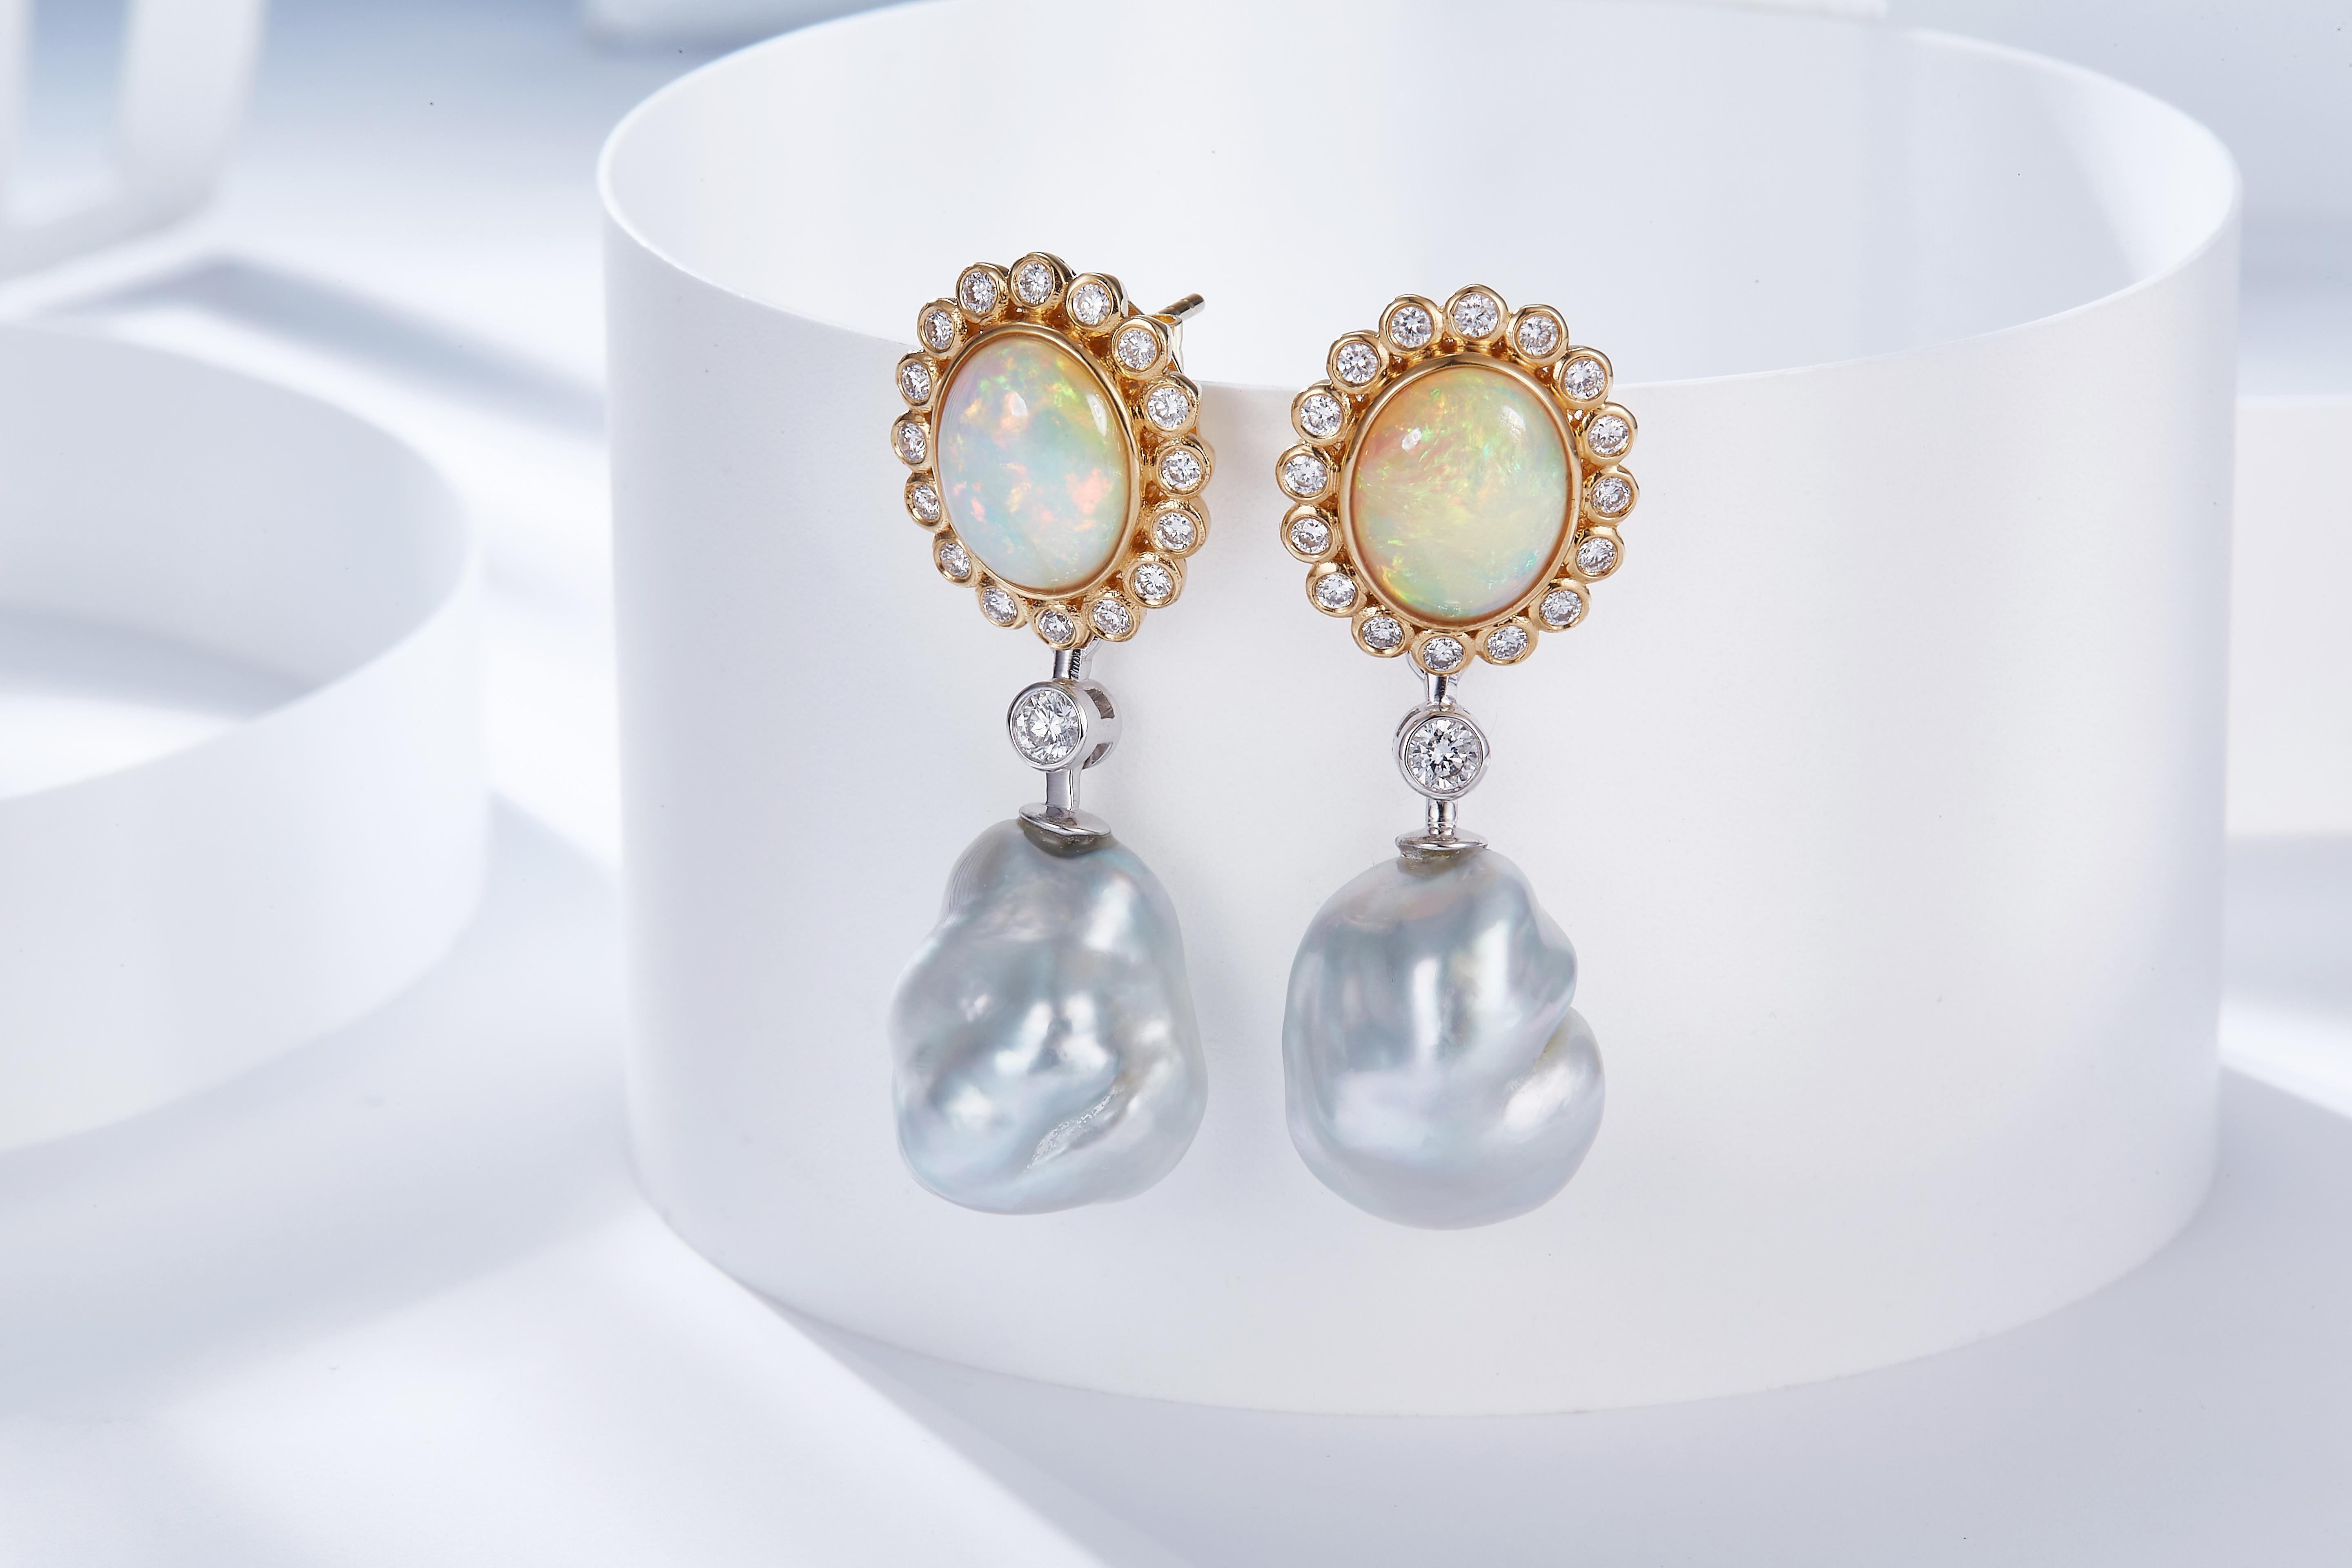 This is a pair of detachable earring consists of Solid Australian White Opal and massive Australian South Sea Baroque Pearl. The Pearls can be removed from the studs and you can wear the Solid White Opral diamond cluster by itself. It is a very